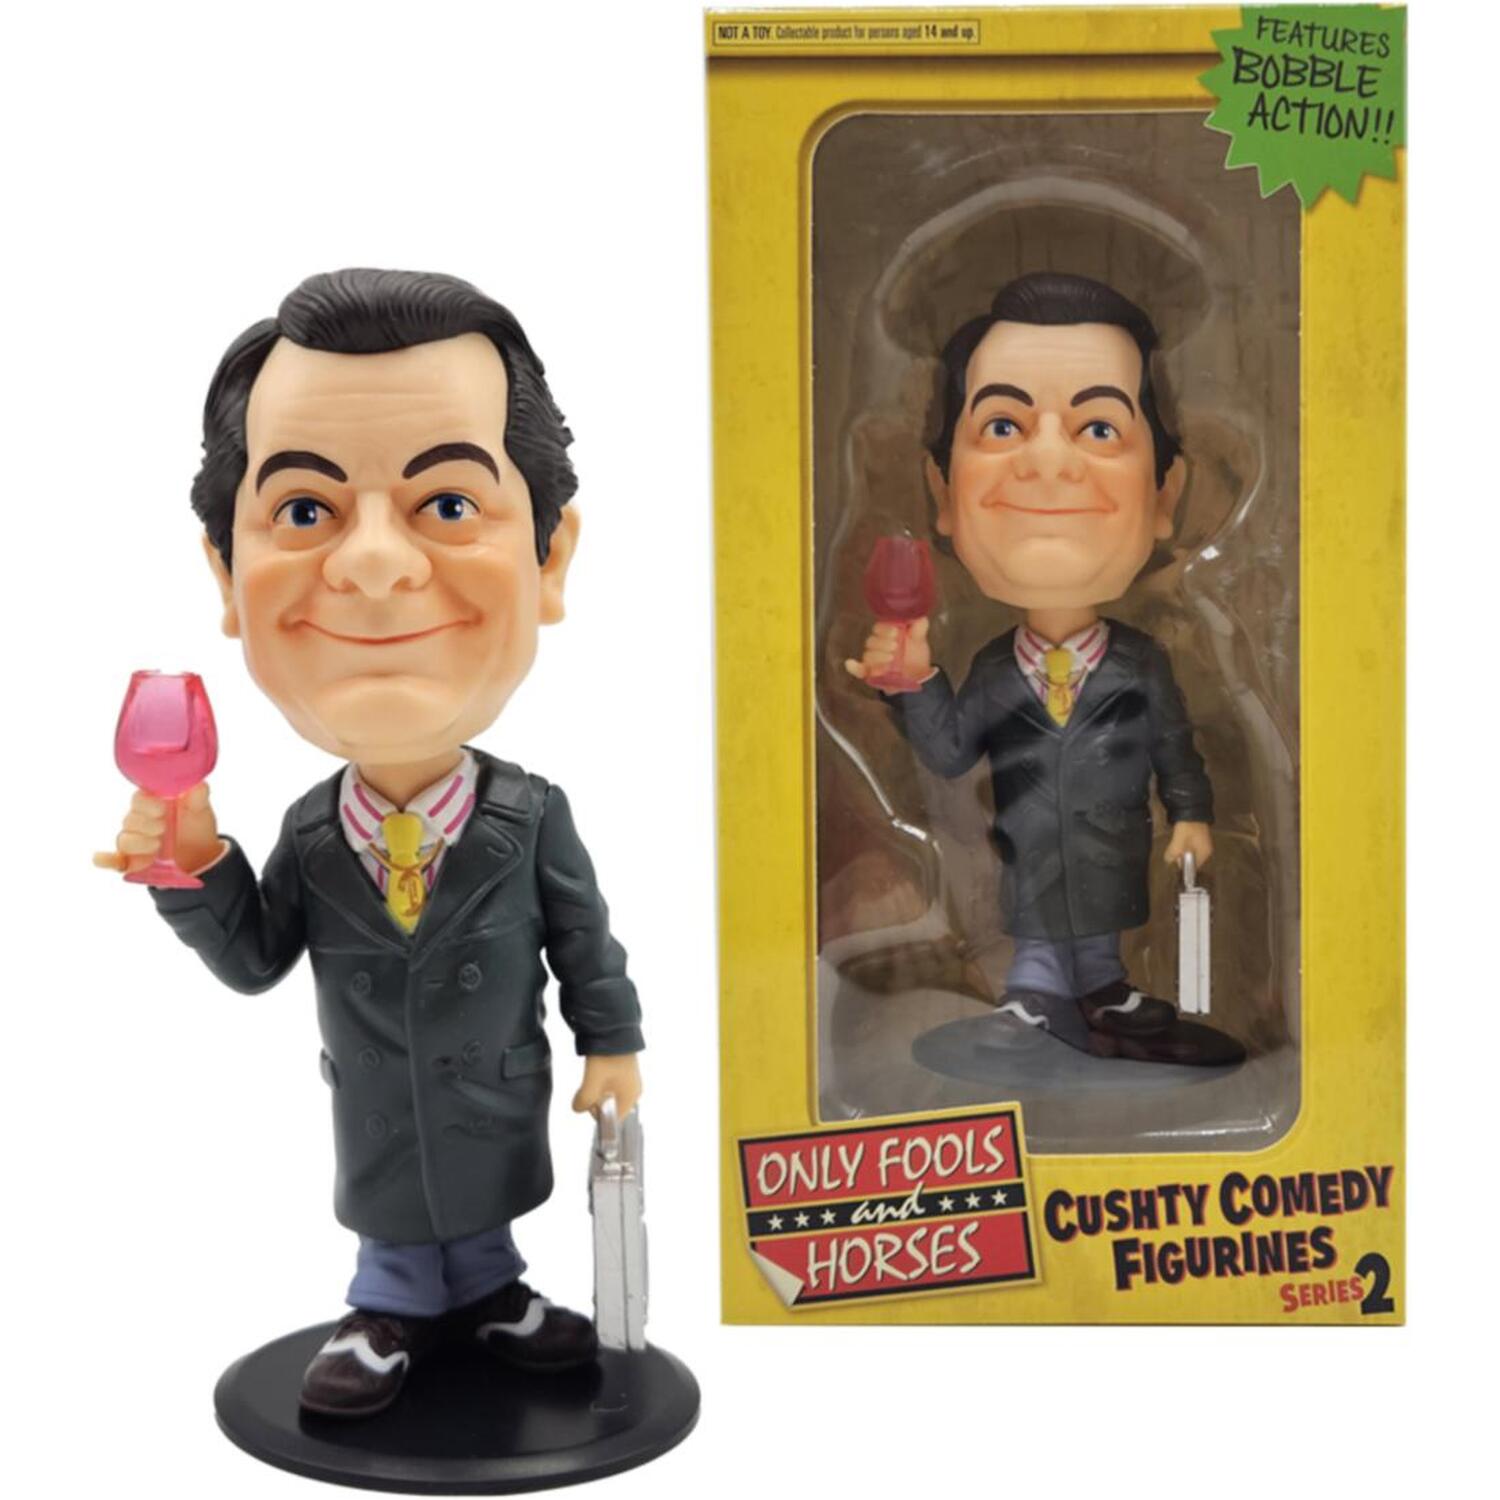 Only Fools and Horses Cushty Comedy Figurine Assorted Image 2